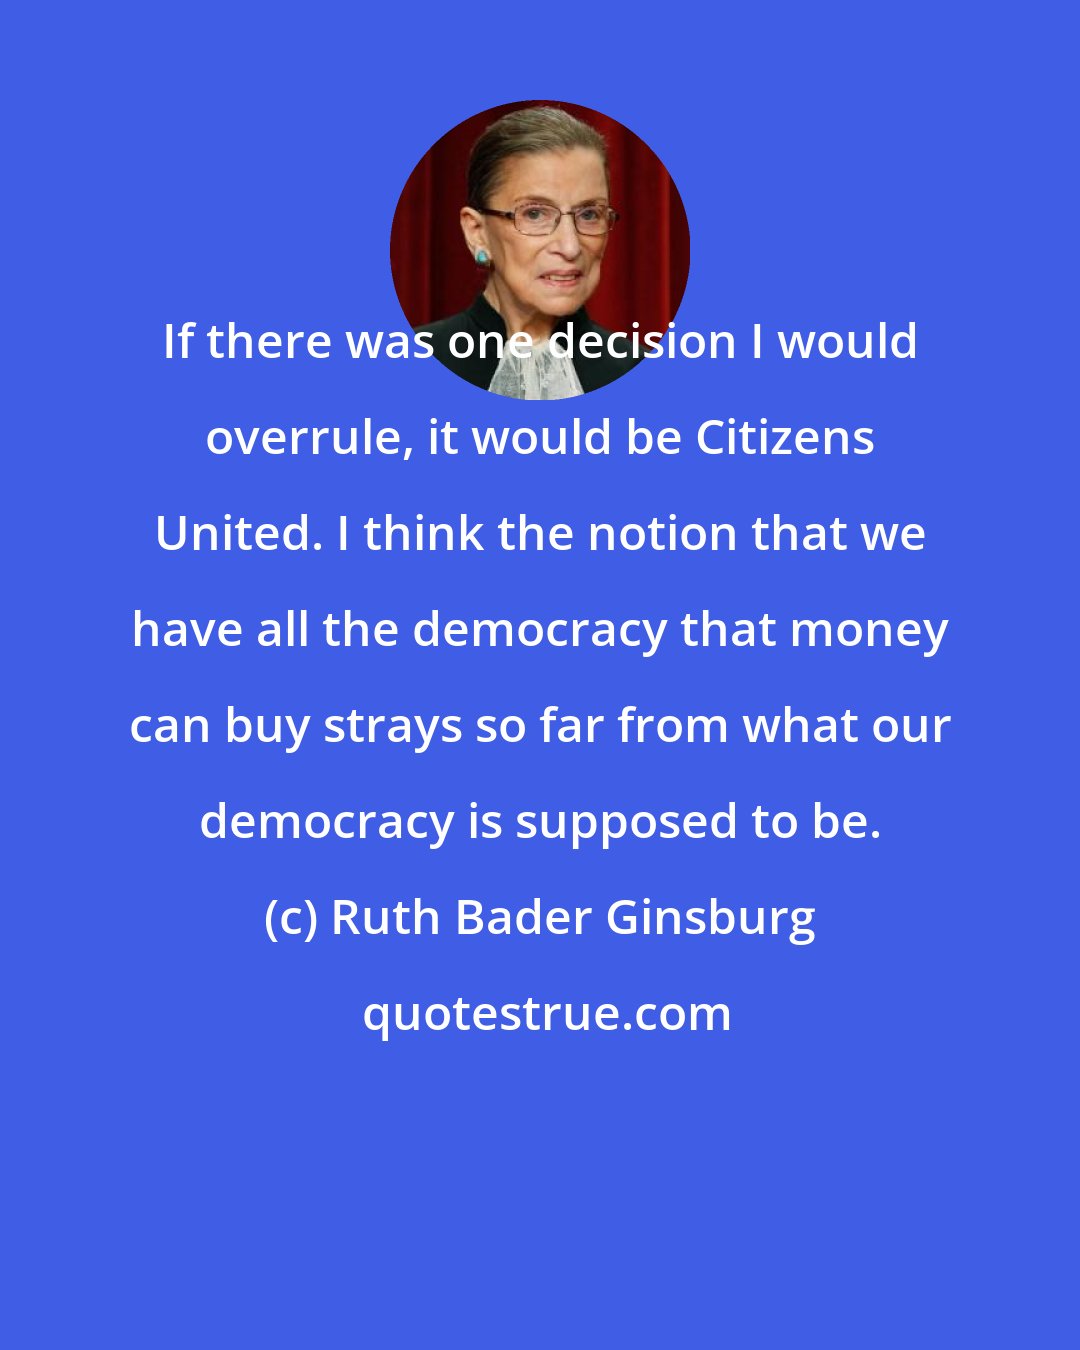 Ruth Bader Ginsburg: If there was one decision I would overrule, it would be Citizens United. I think the notion that we have all the democracy that money can buy strays so far from what our democracy is supposed to be.